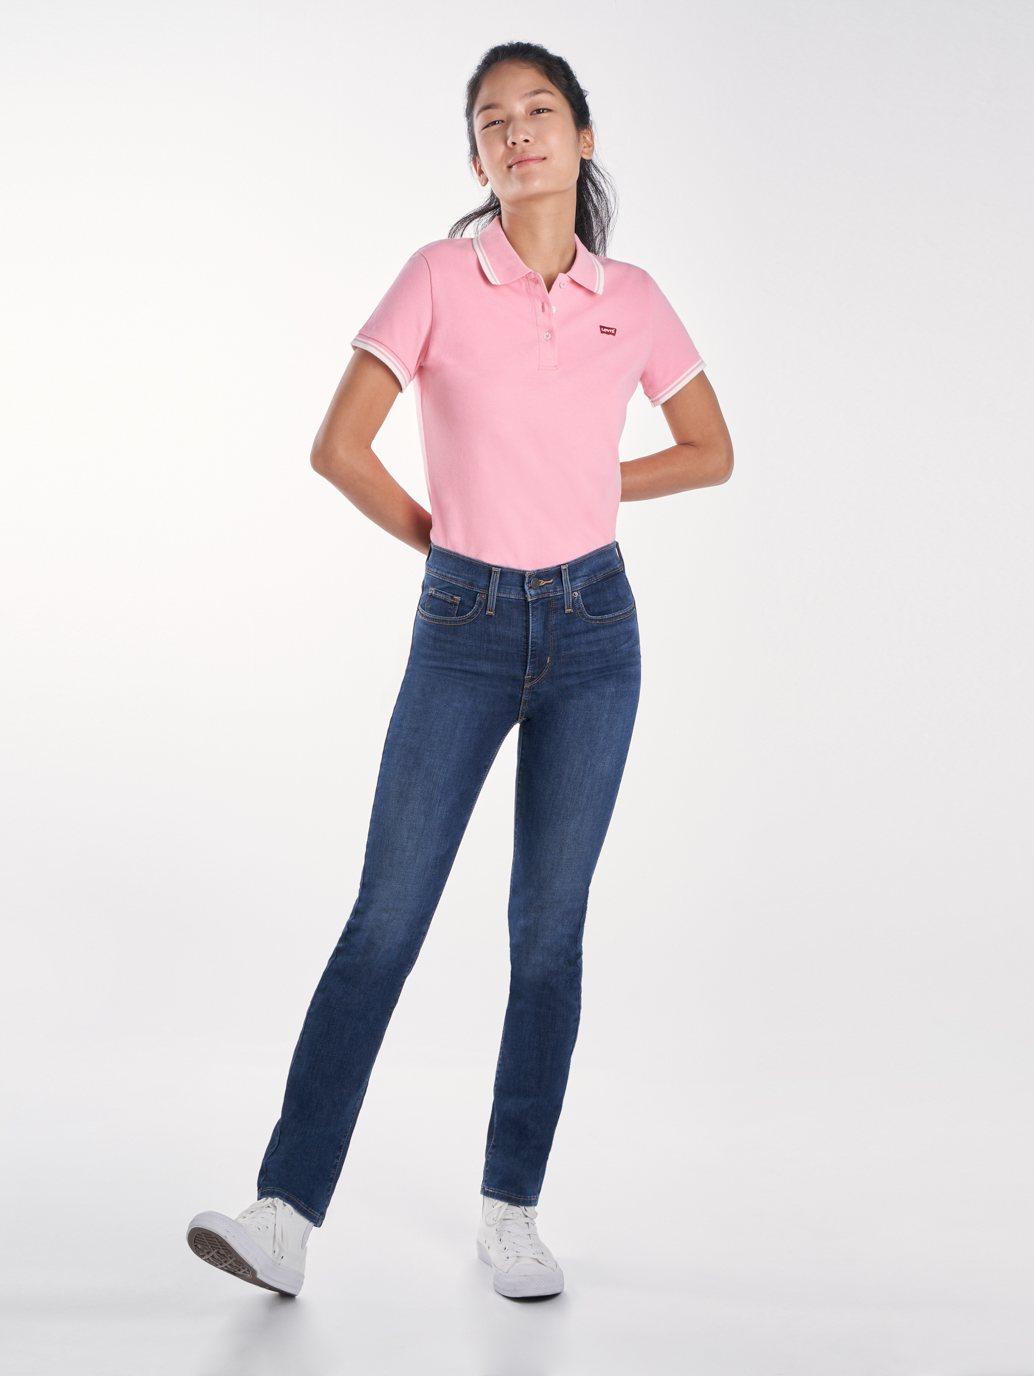 levis malaysia womens 312 shaping slim fit jeans 196270182 13 Details